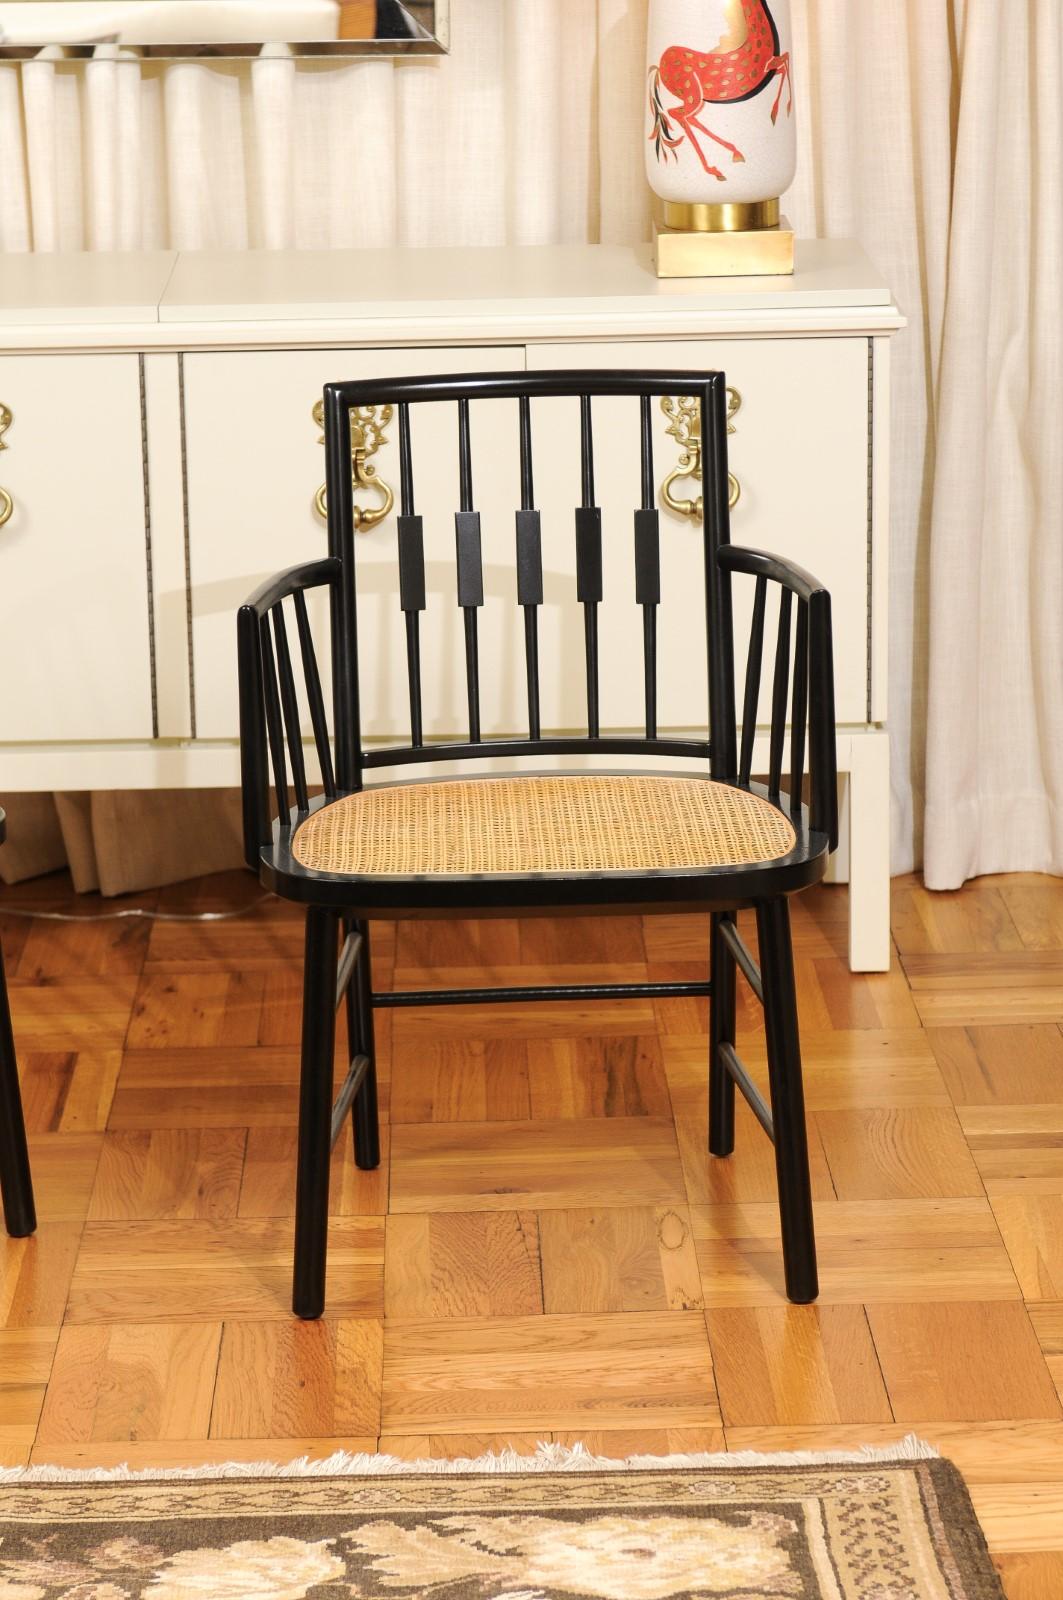 All Arms-Sterling Set of 14 Modern Windsor Cane Chairs by Michael Taylor In Excellent Condition For Sale In Atlanta, GA